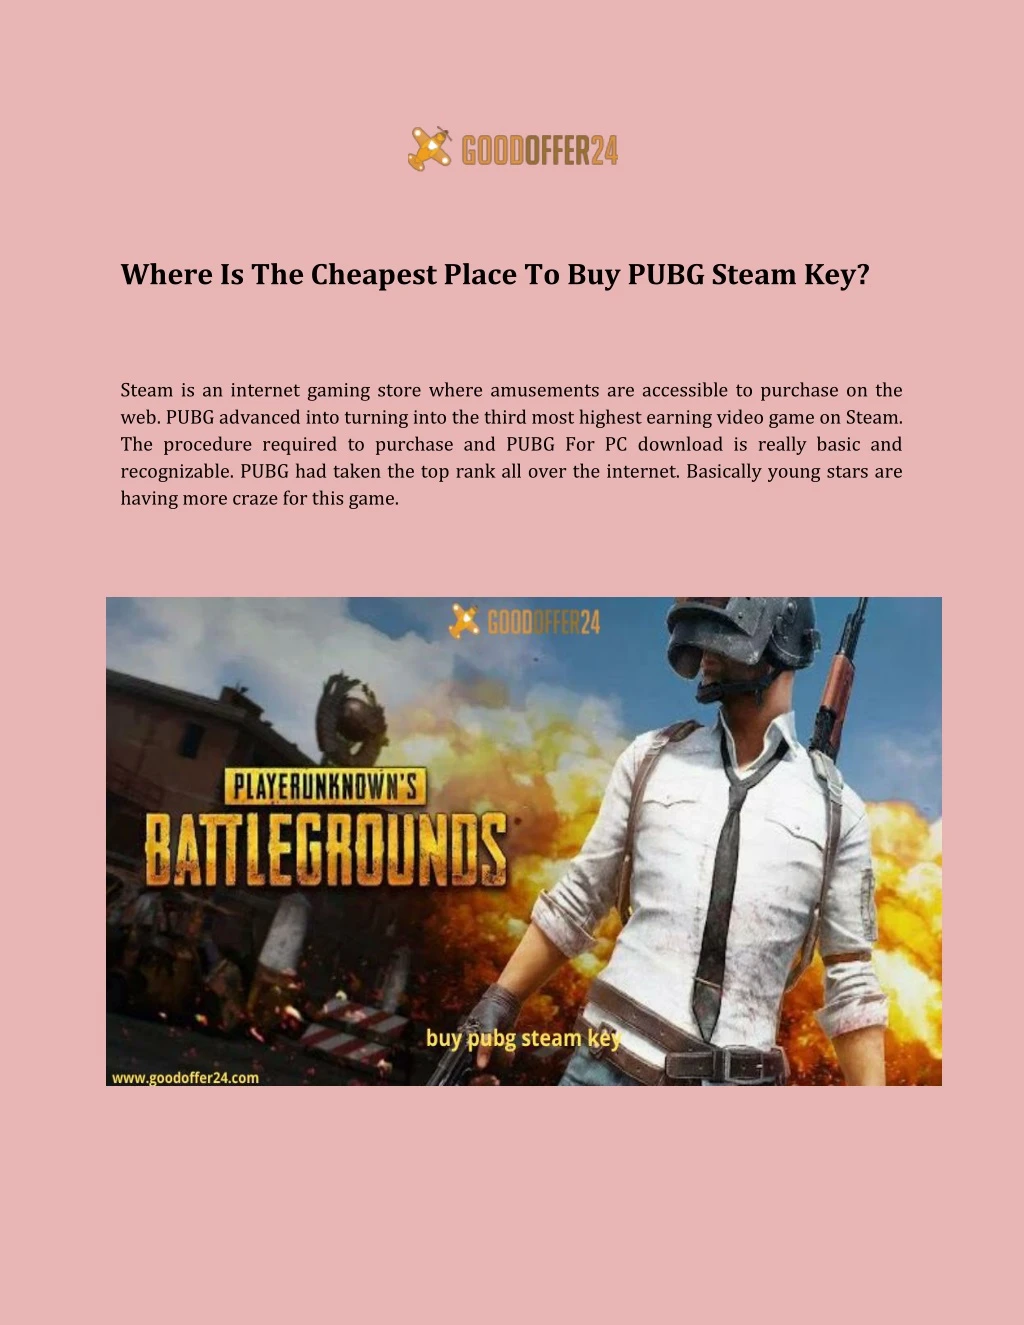 where is the cheapest place to buy pubg steam